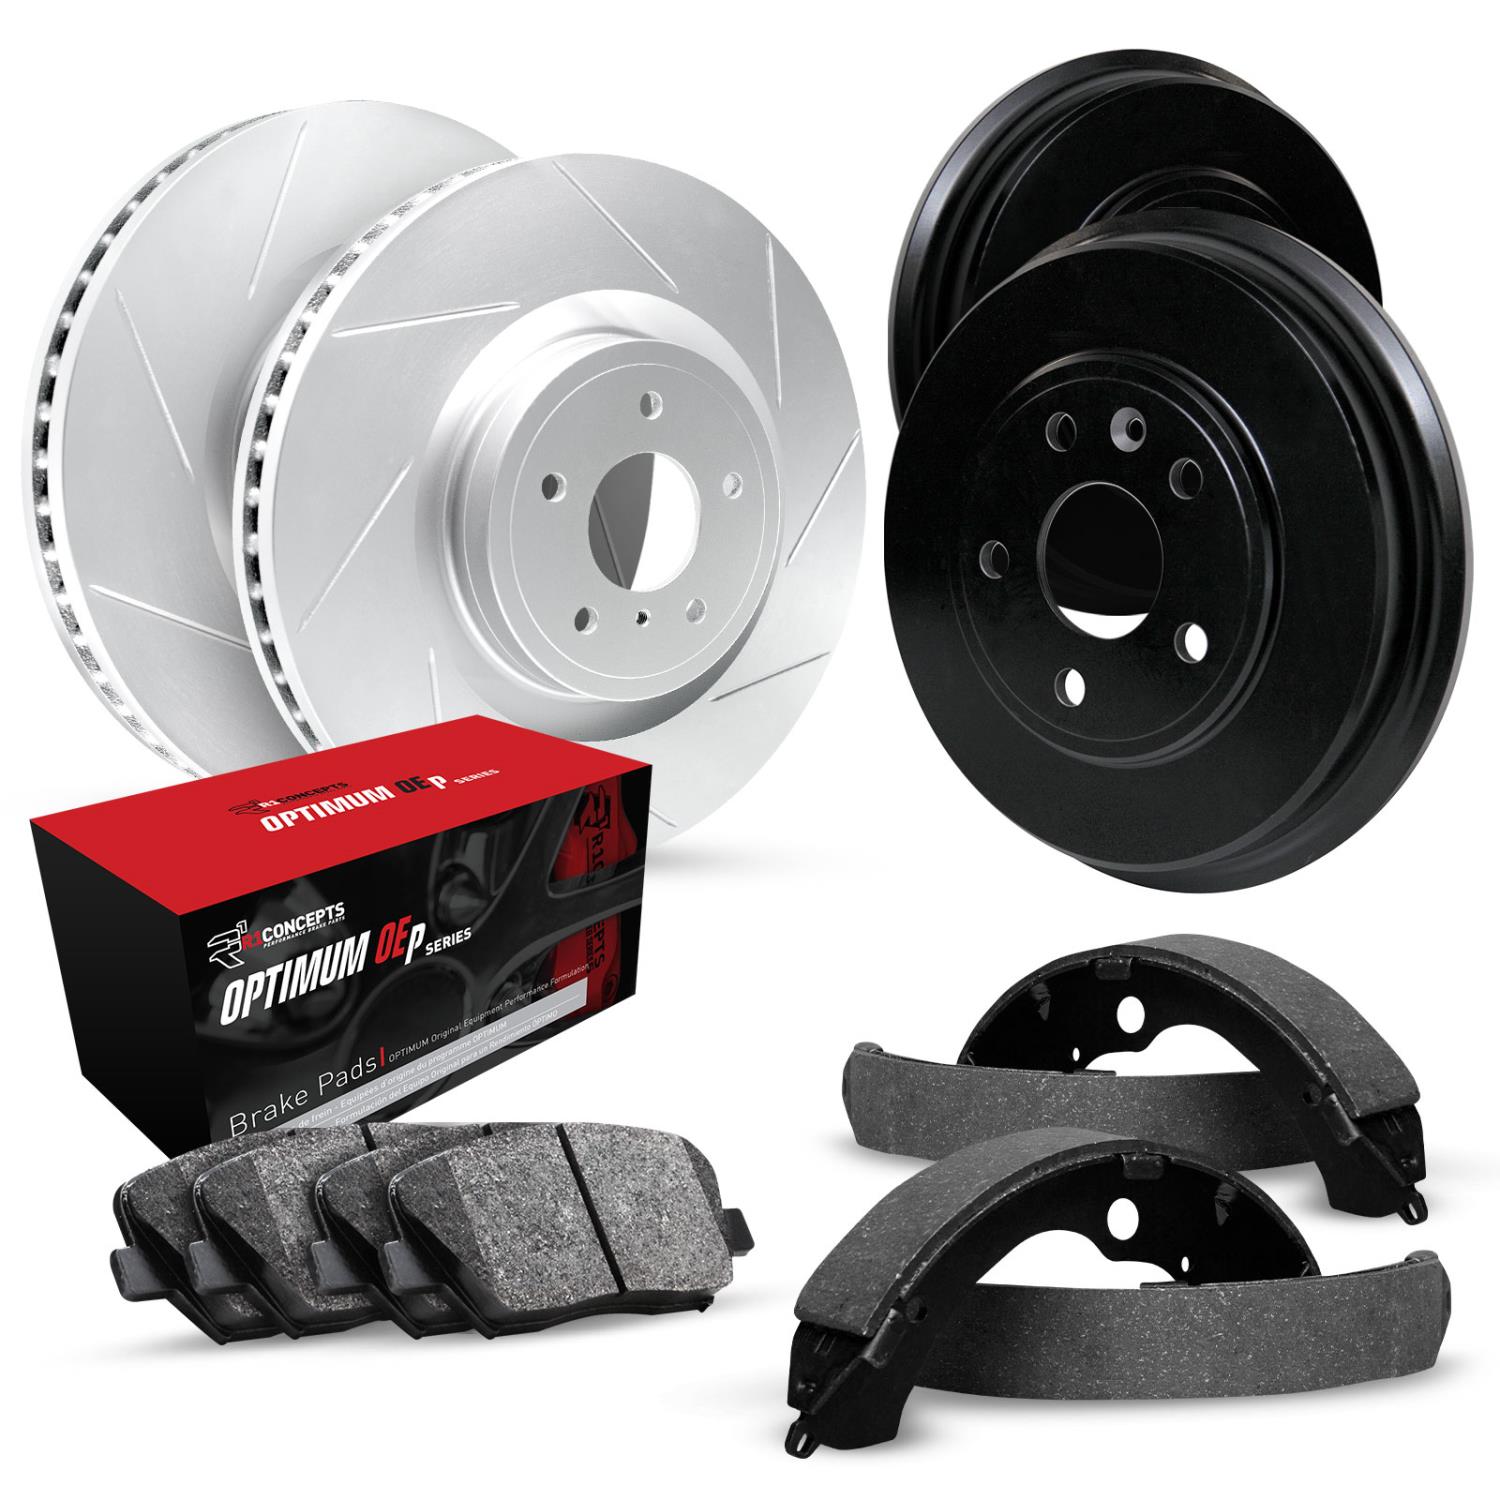 GEO-Carbon Slotted Brake Rotor & Drum Set w/Optimum OE Pads & Shoes, 2002-2005 Land Rover, Position: Front & Rear